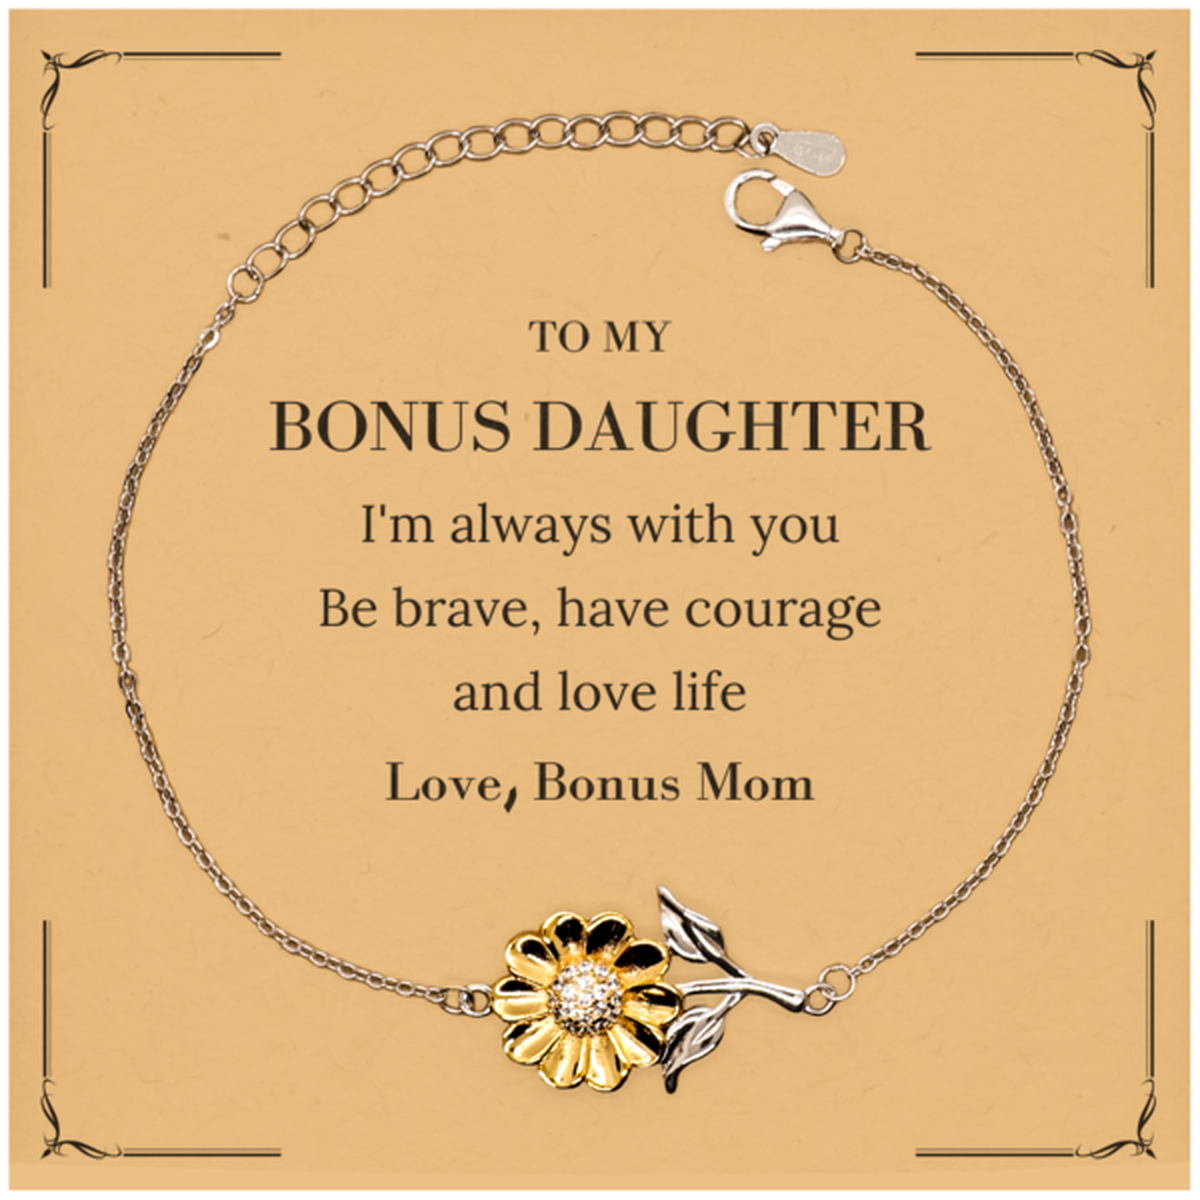 To My Bonus Daughter Gifts from Bonus Mom, Unique Sunflower Bracelet Inspirational Christmas Birthday Graduation Gifts for Bonus Daughter I'm always with you. Be brave, have courage and love life. Love, Bonus Mom